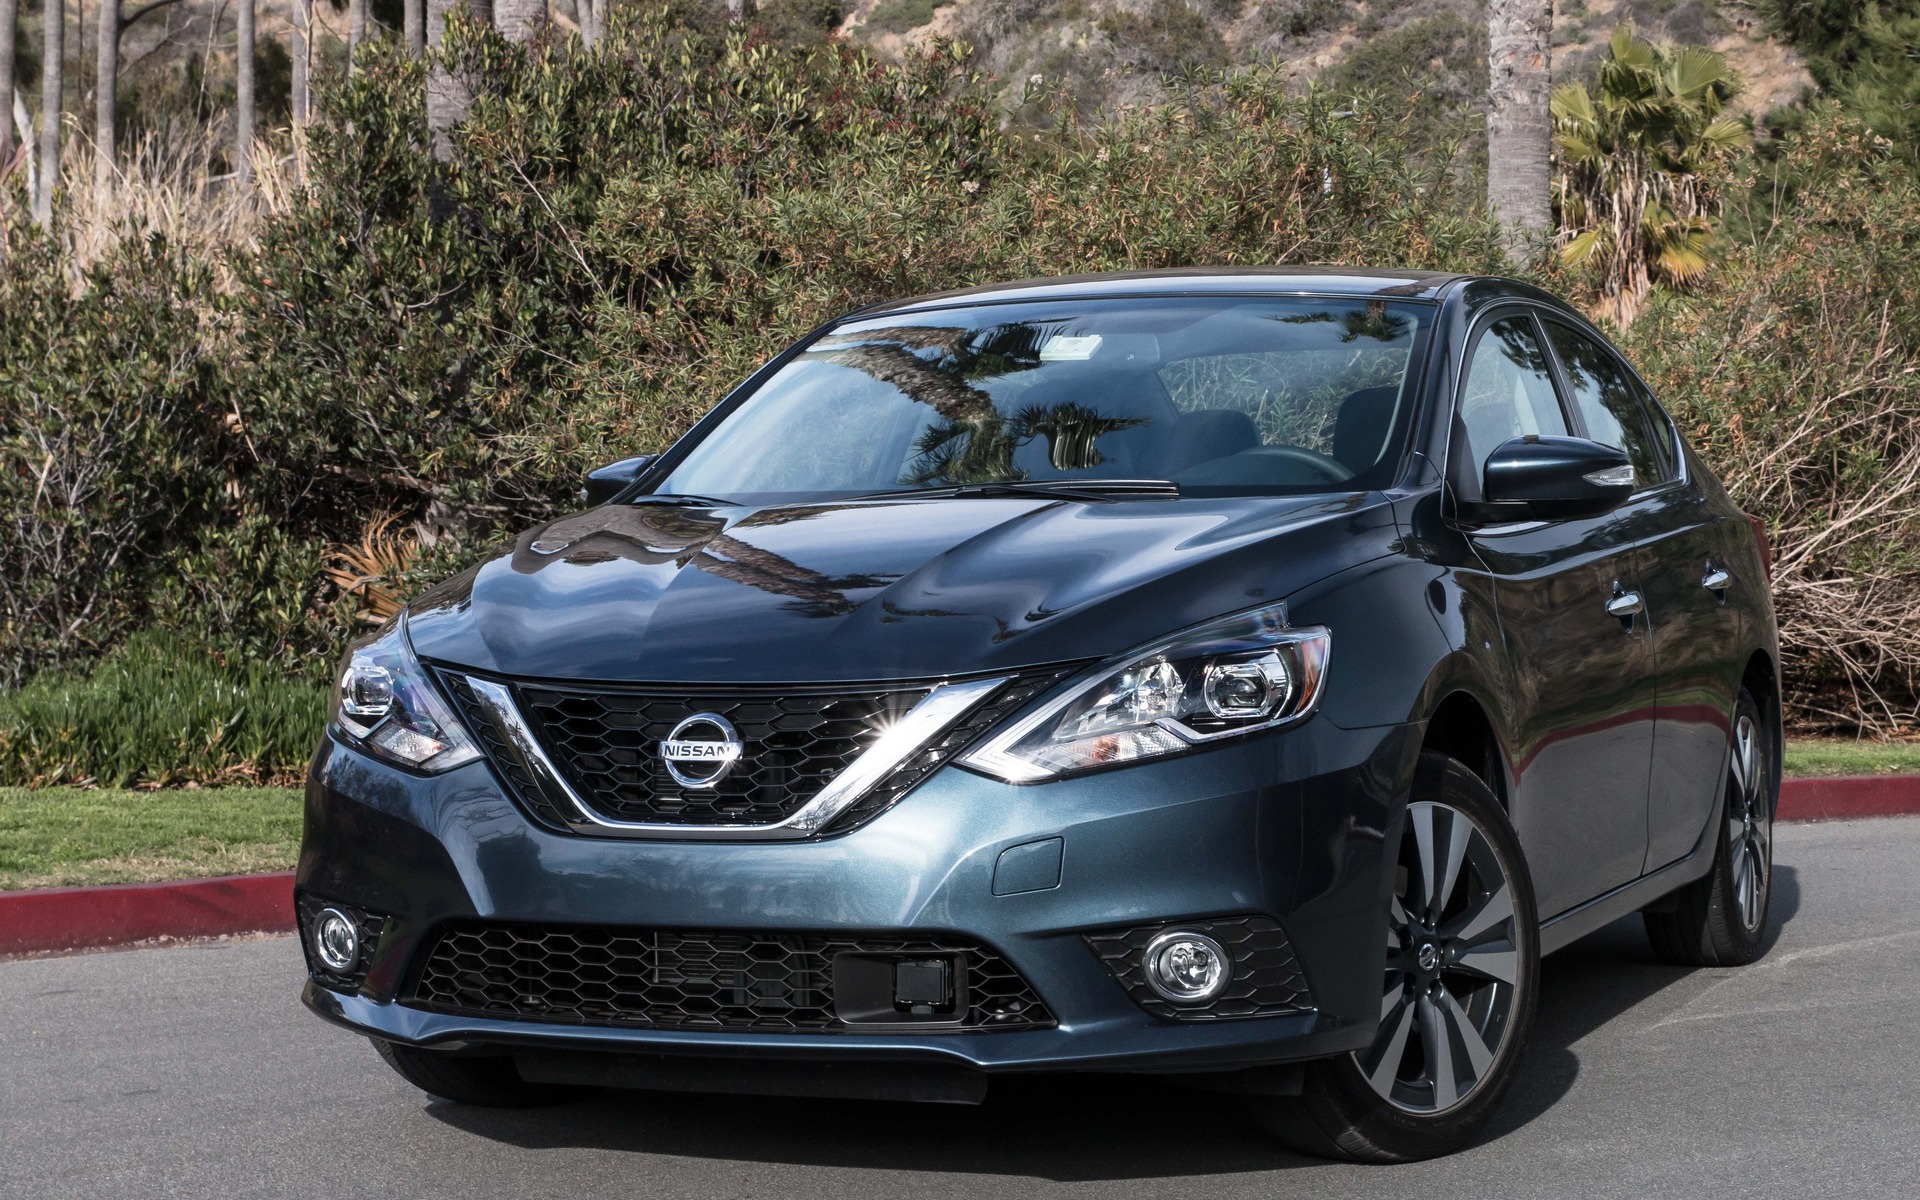 2016 Nissan Sentra: 20% New, 50% Better - The Car Guide